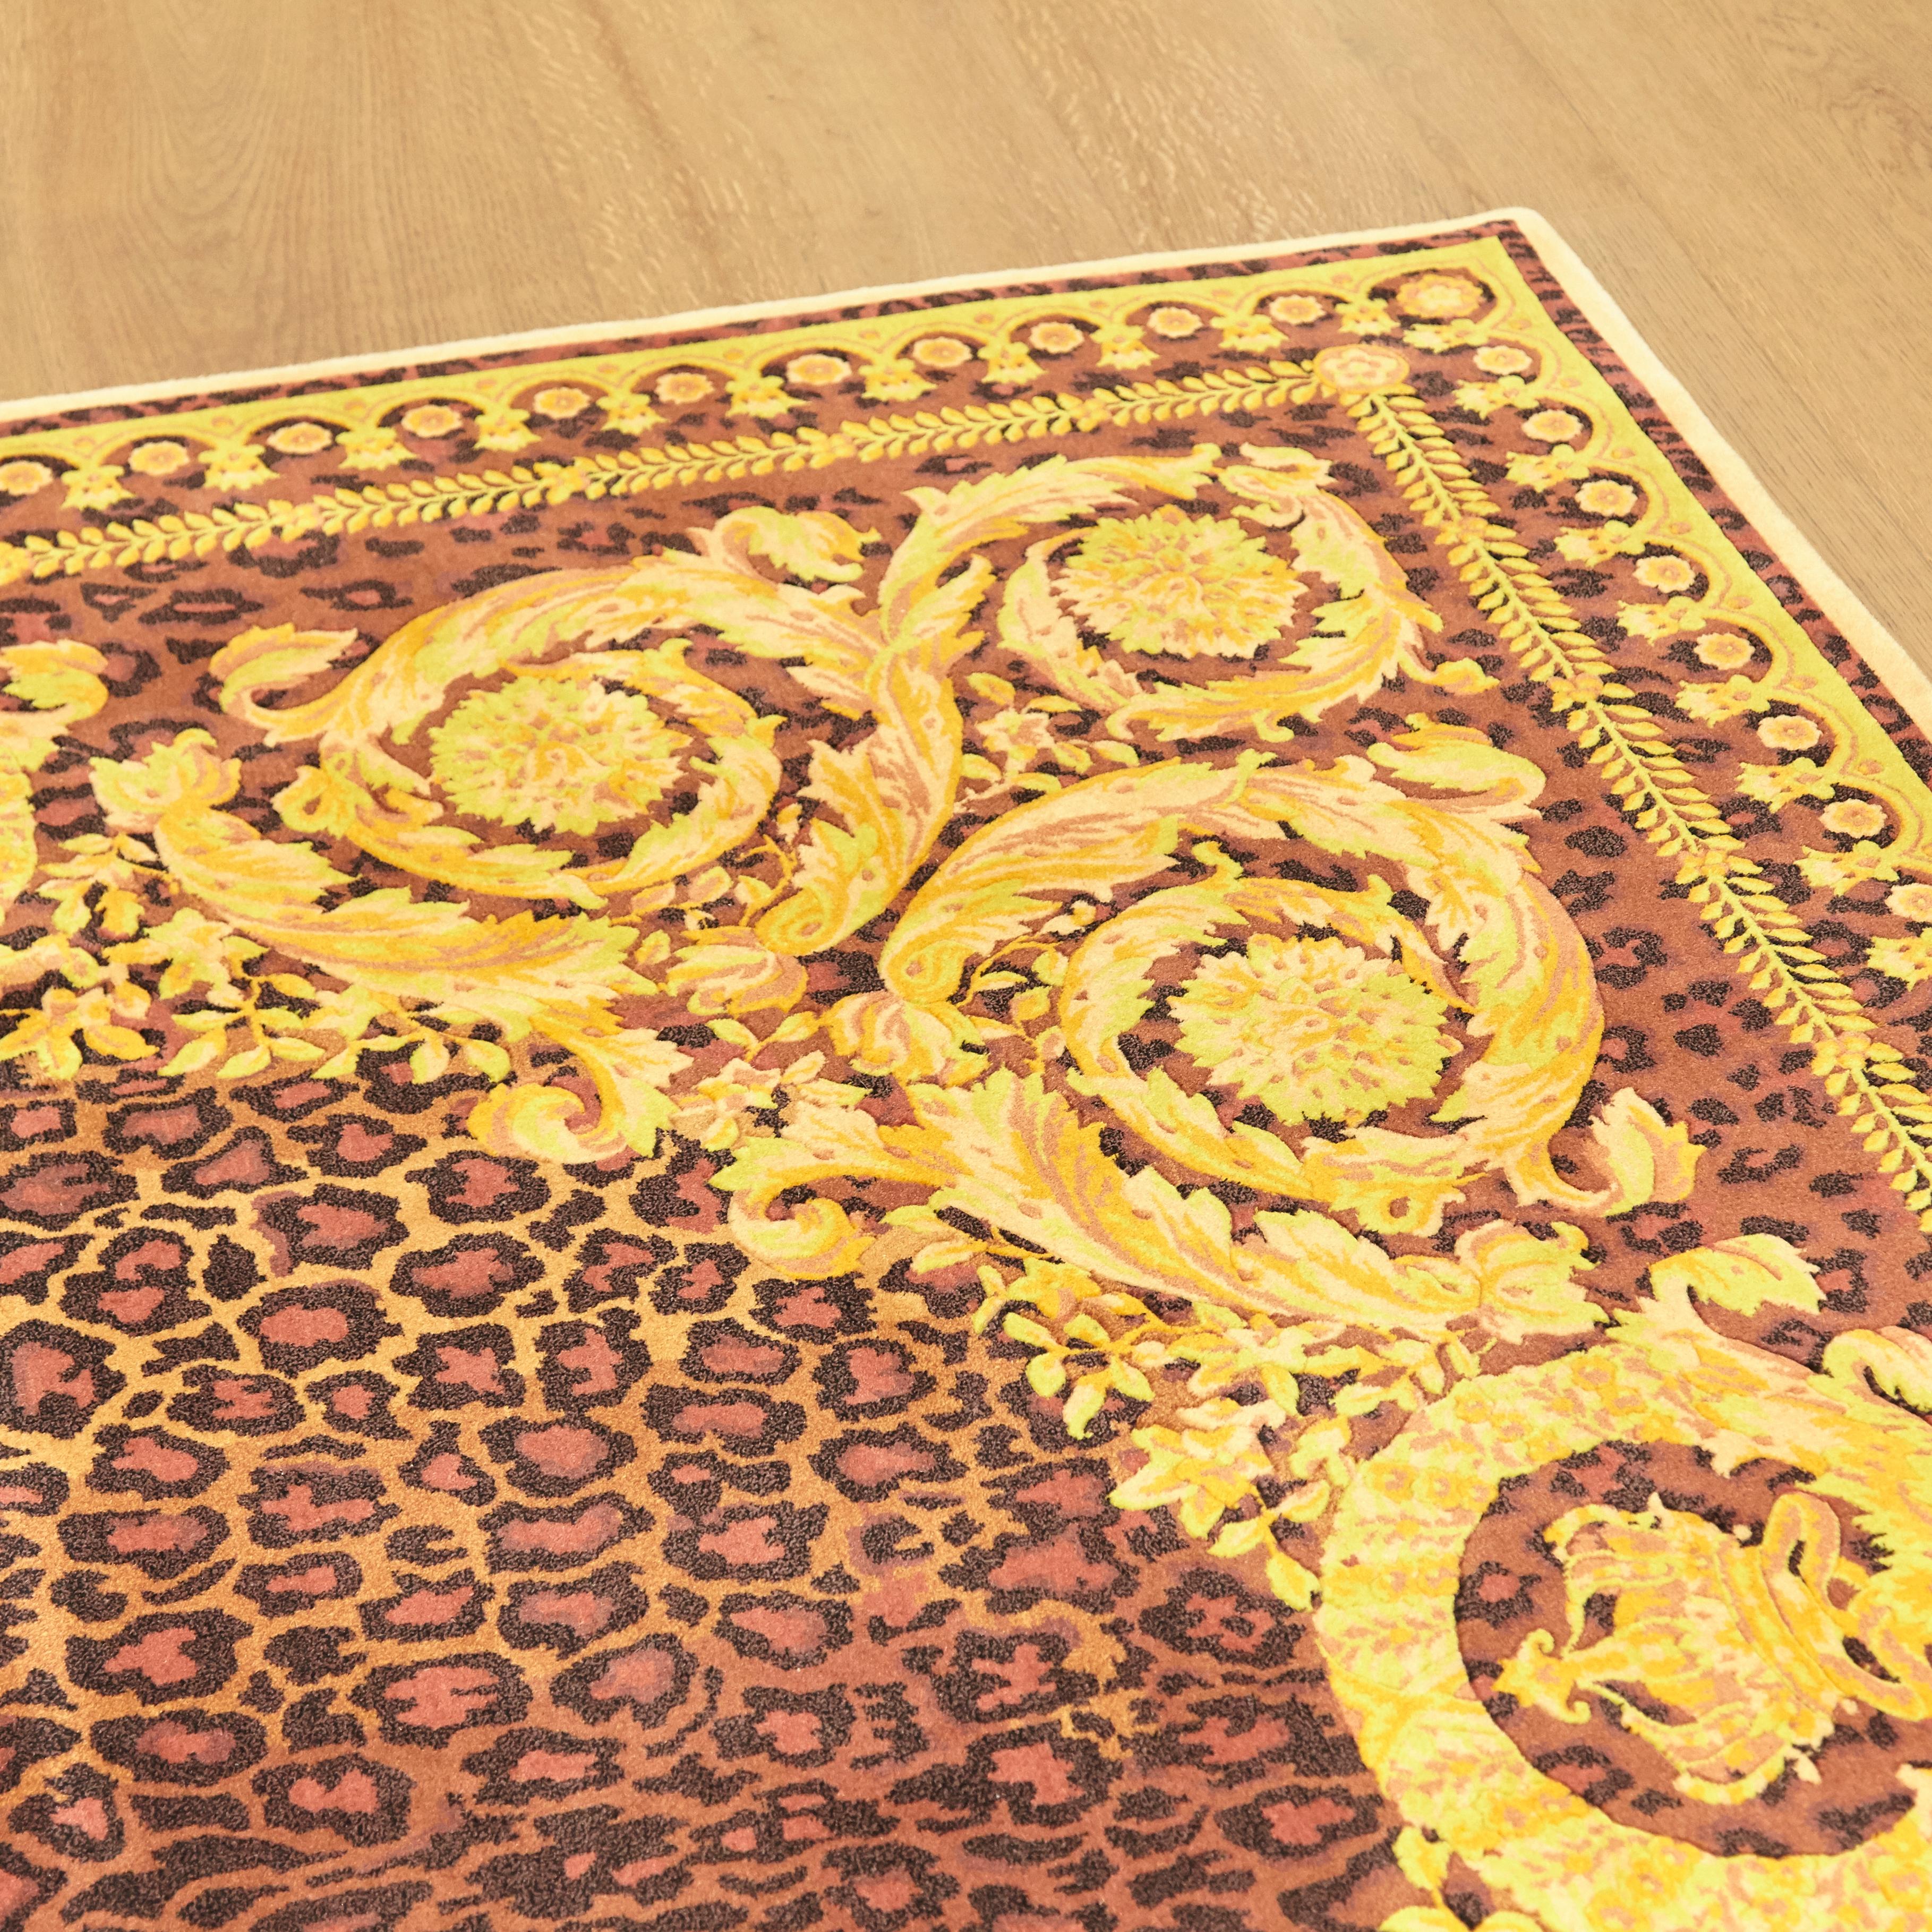 Gianni Versace Collection Rug Wild Barocco, Gold Leopard Animal Print, 1980 3